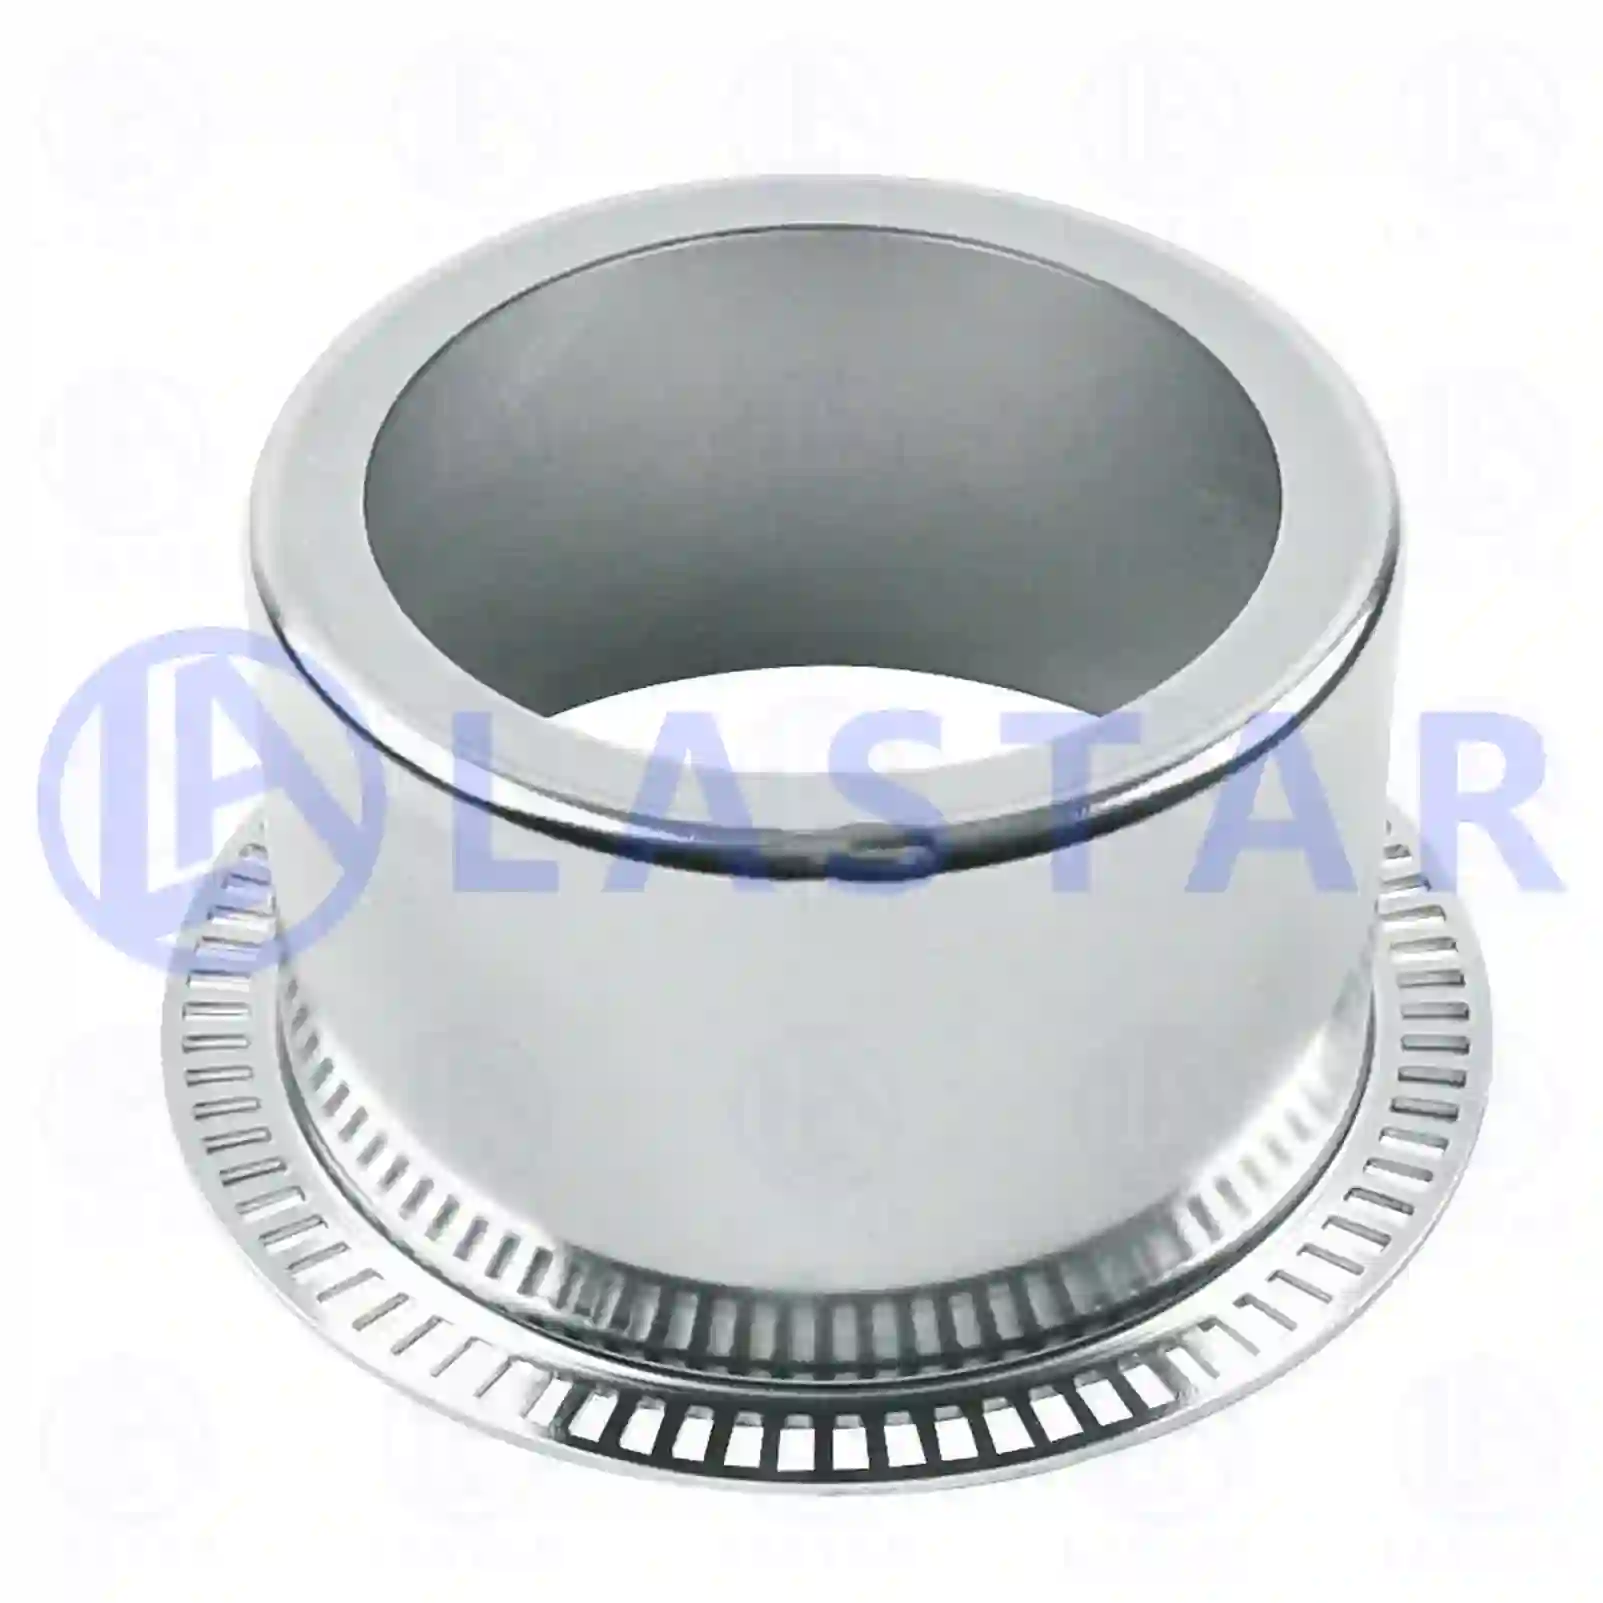 ABS ring, 77726123, 1962328, 81524030028, 9703560315, 9703560415, ZG50010-0008 ||  77726123 Lastar Spare Part | Truck Spare Parts, Auotomotive Spare Parts ABS ring, 77726123, 1962328, 81524030028, 9703560315, 9703560415, ZG50010-0008 ||  77726123 Lastar Spare Part | Truck Spare Parts, Auotomotive Spare Parts